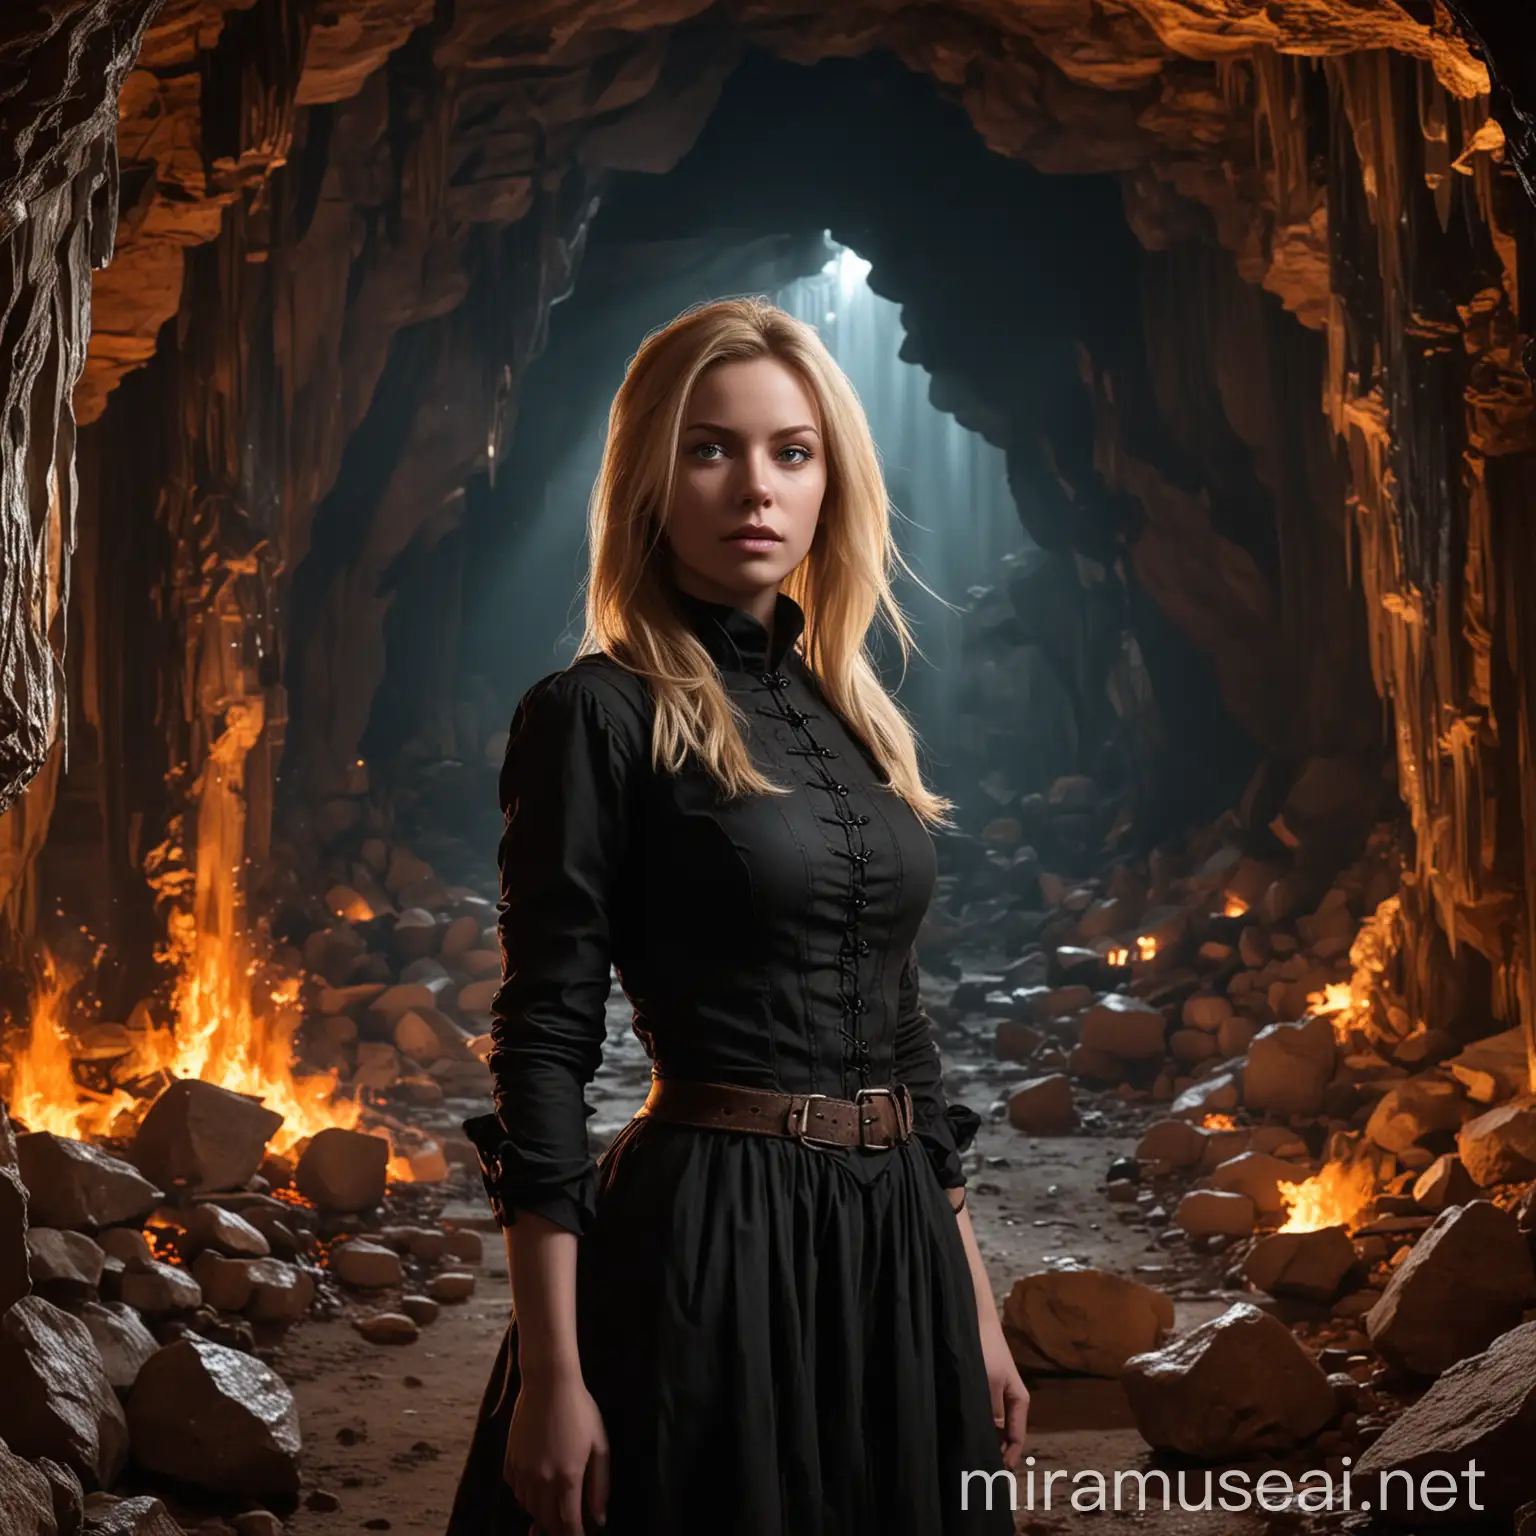 Young Woman Witch Hunter in Victorian Black Clothing Amid Orange Crystal Caverns